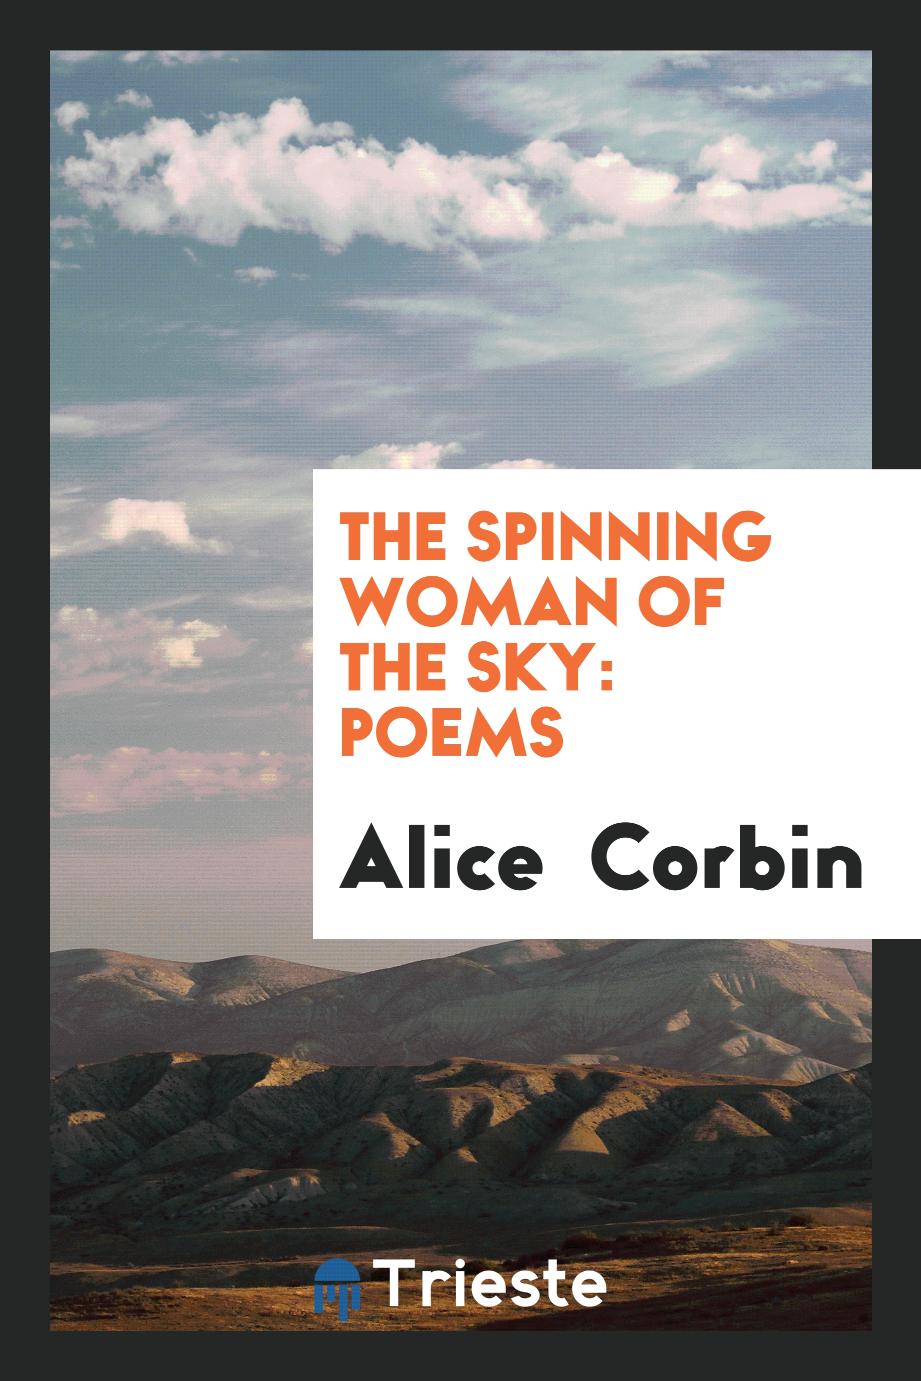 The spinning woman of the sky: poems